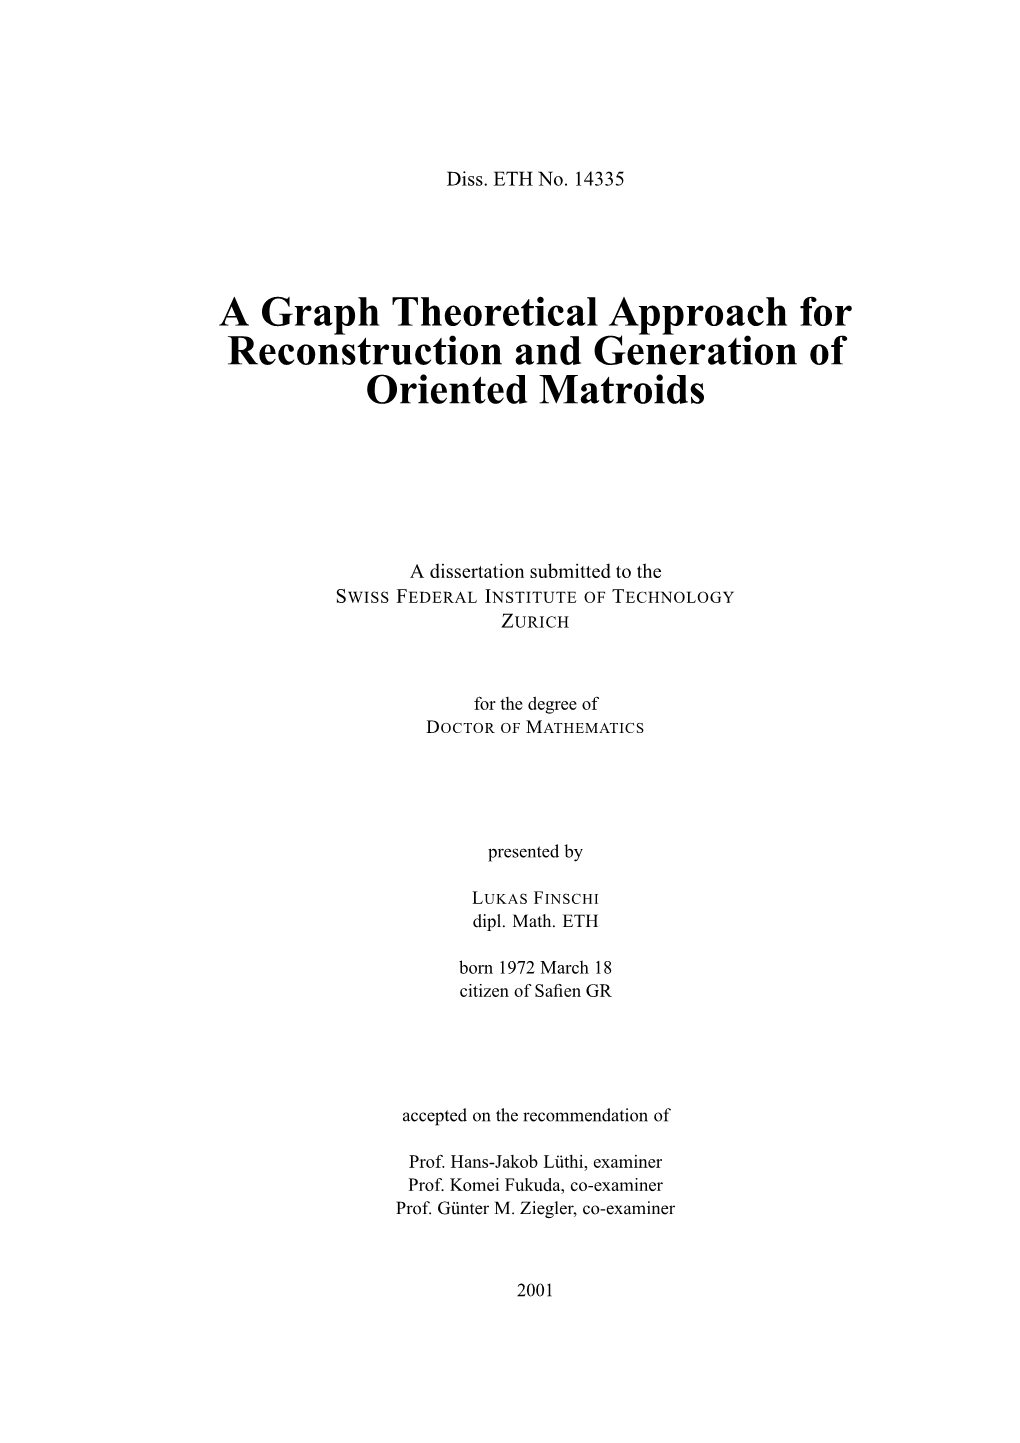 A Graph Theoretical Approach for Reconstruction and Generation of Oriented Matroids